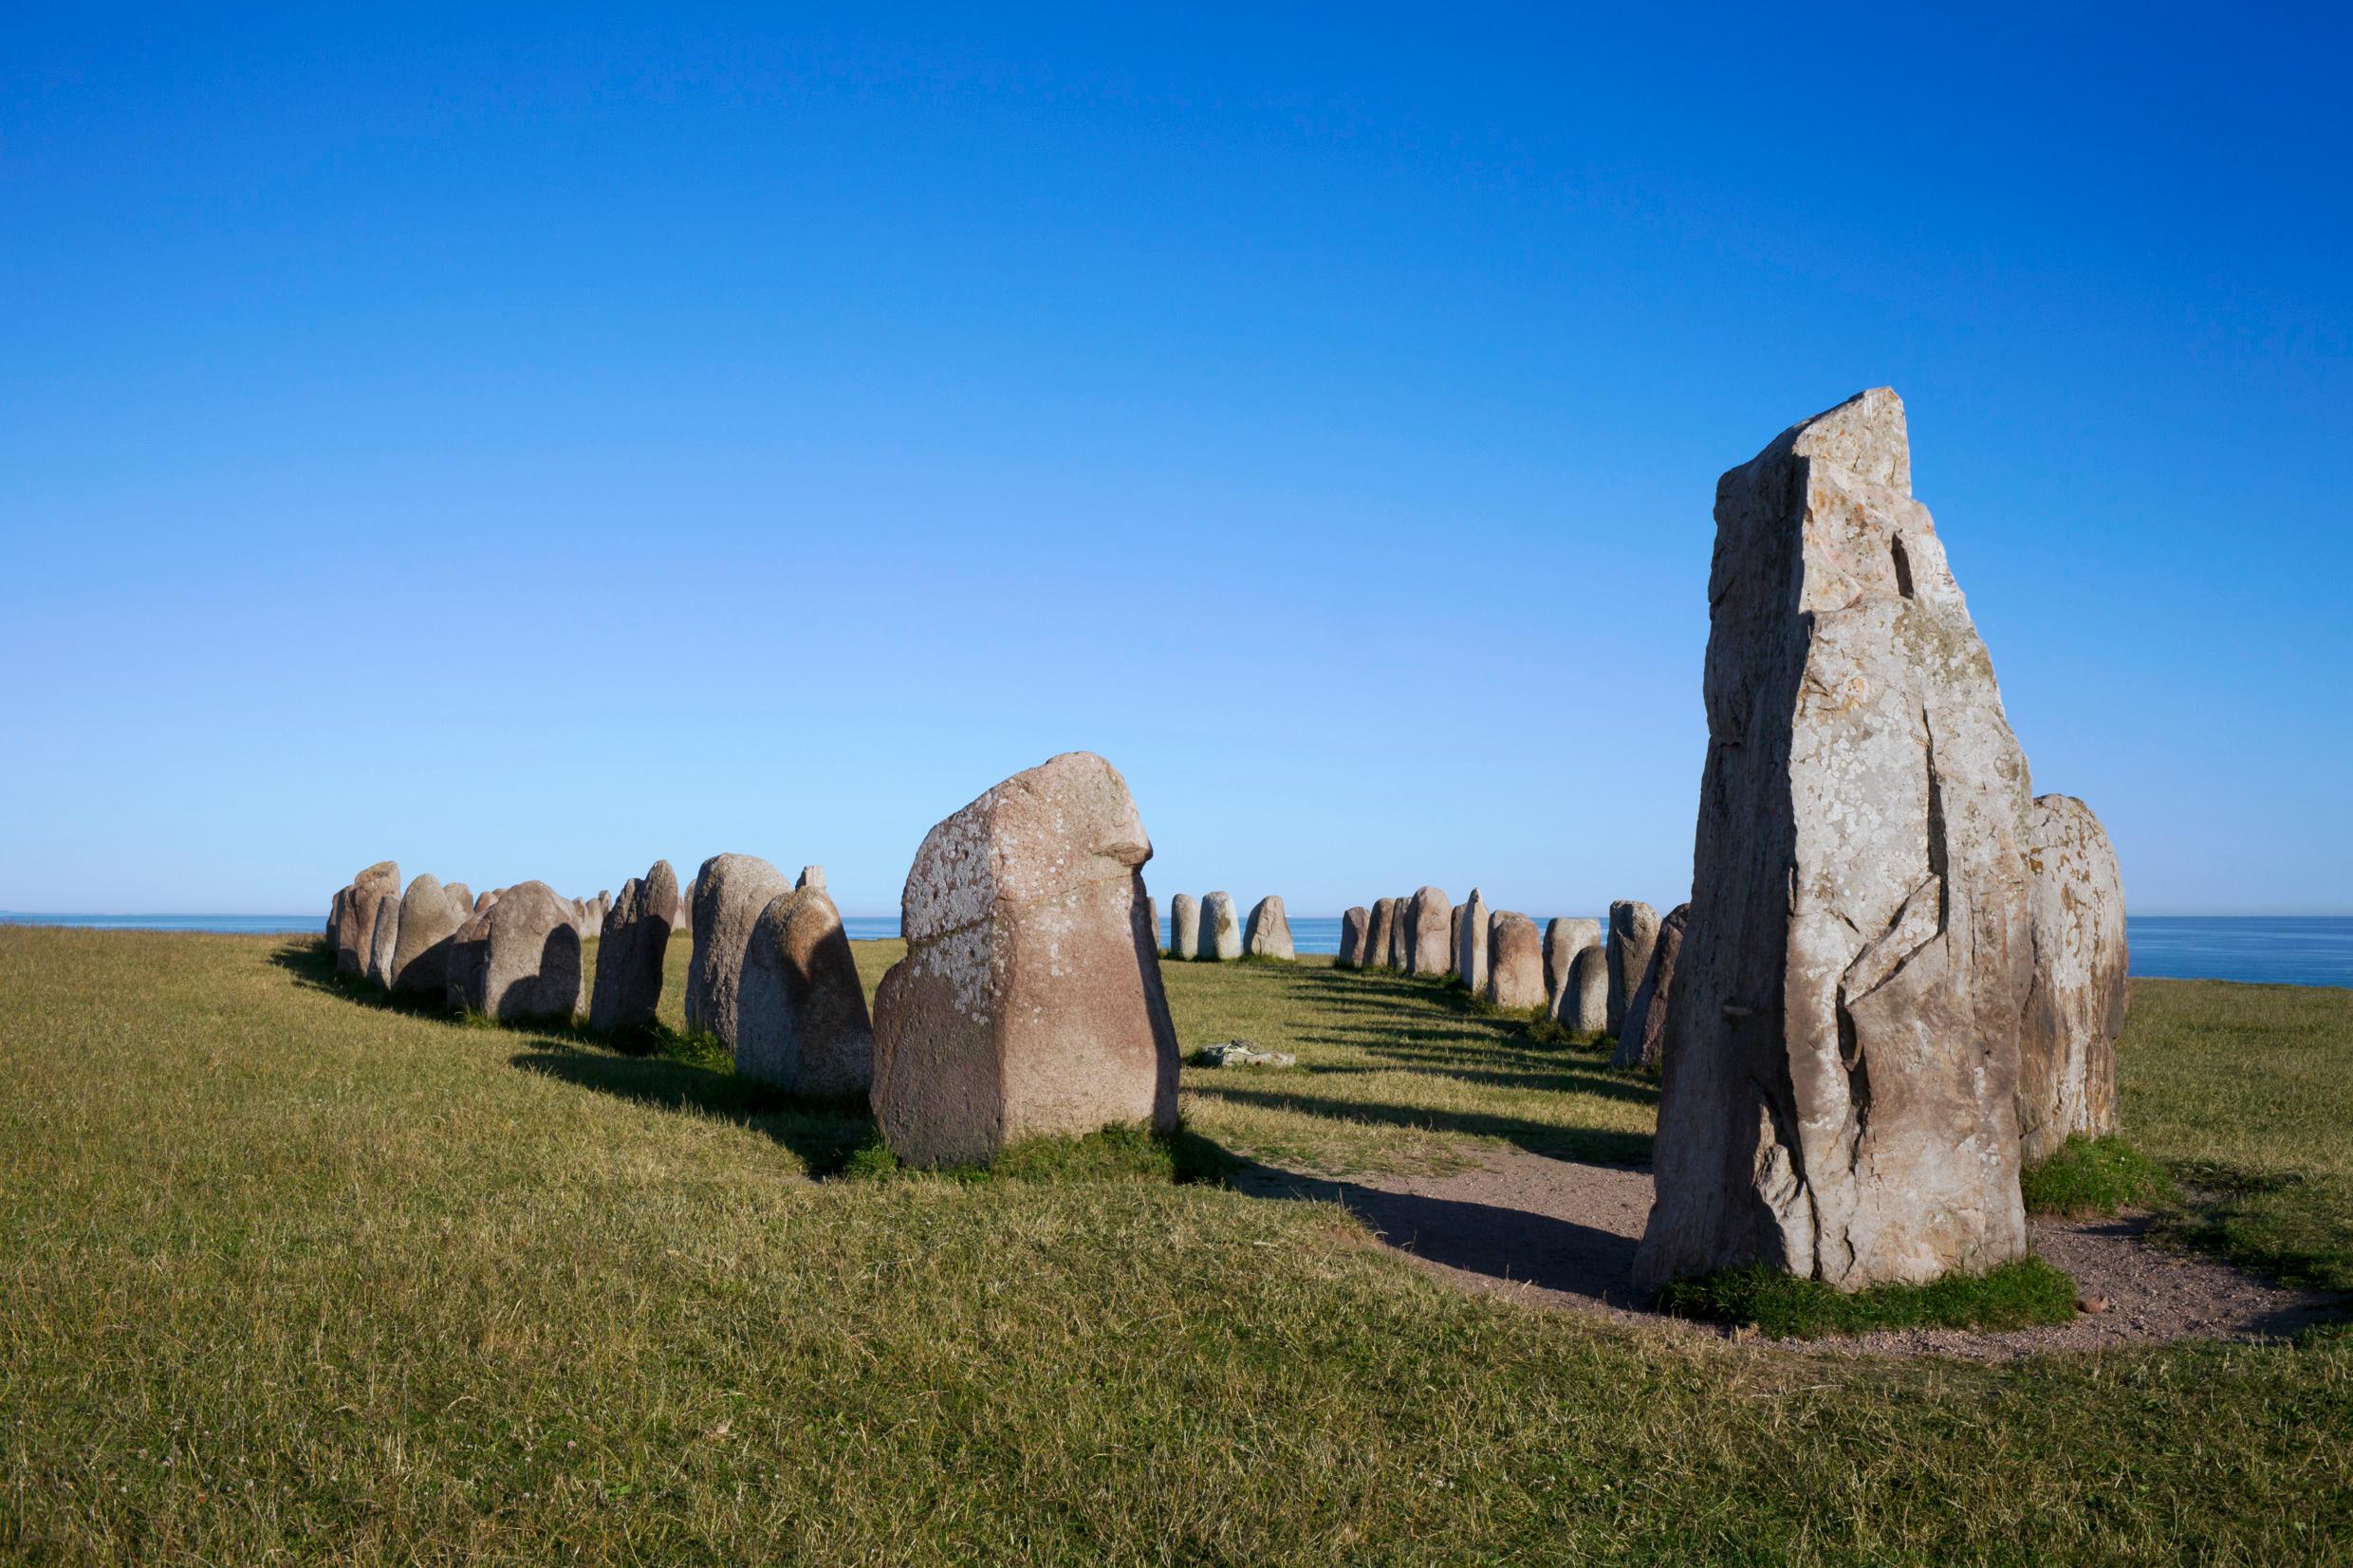 Ale's Stones stand on a field with the ocean in the background.